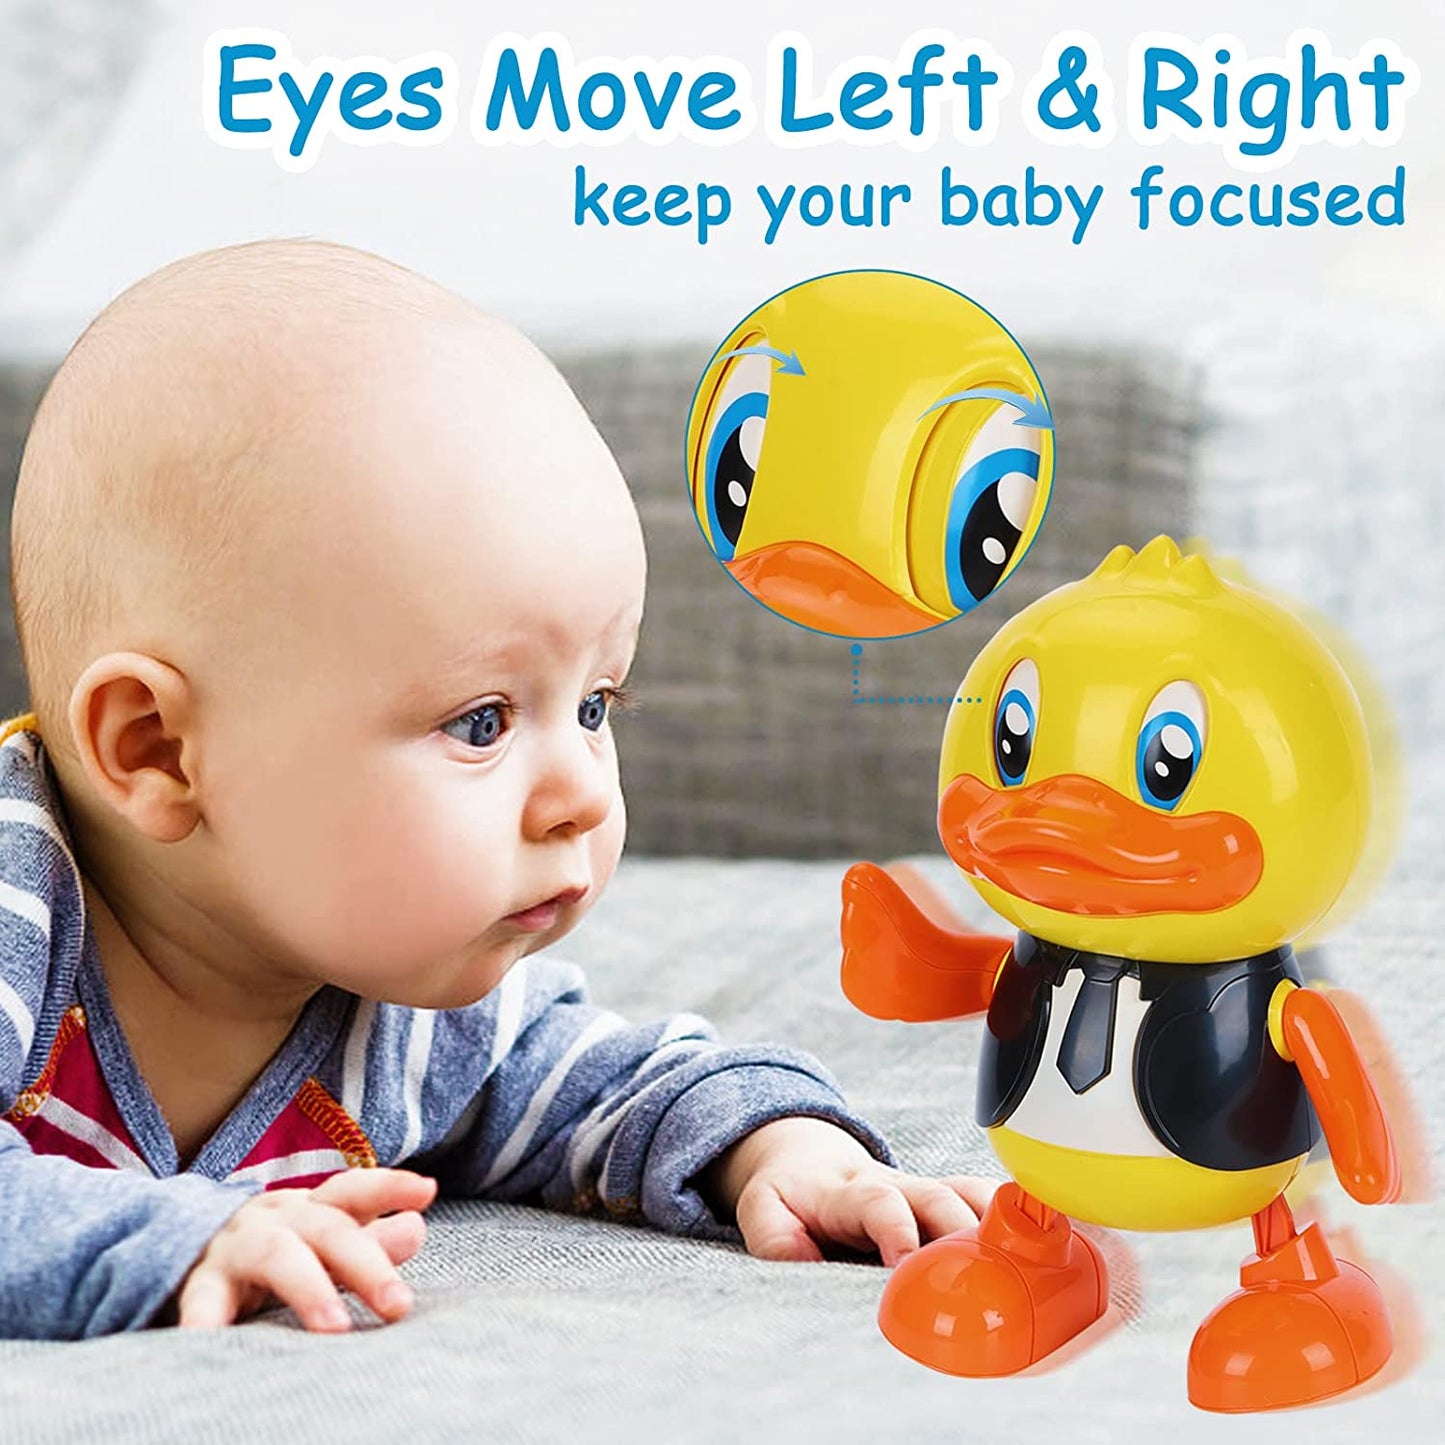 Baby Musical Toys, Crawling Toy, With Music And Led Lights, Walking Toy, Educational Tummy Time Duck Toy